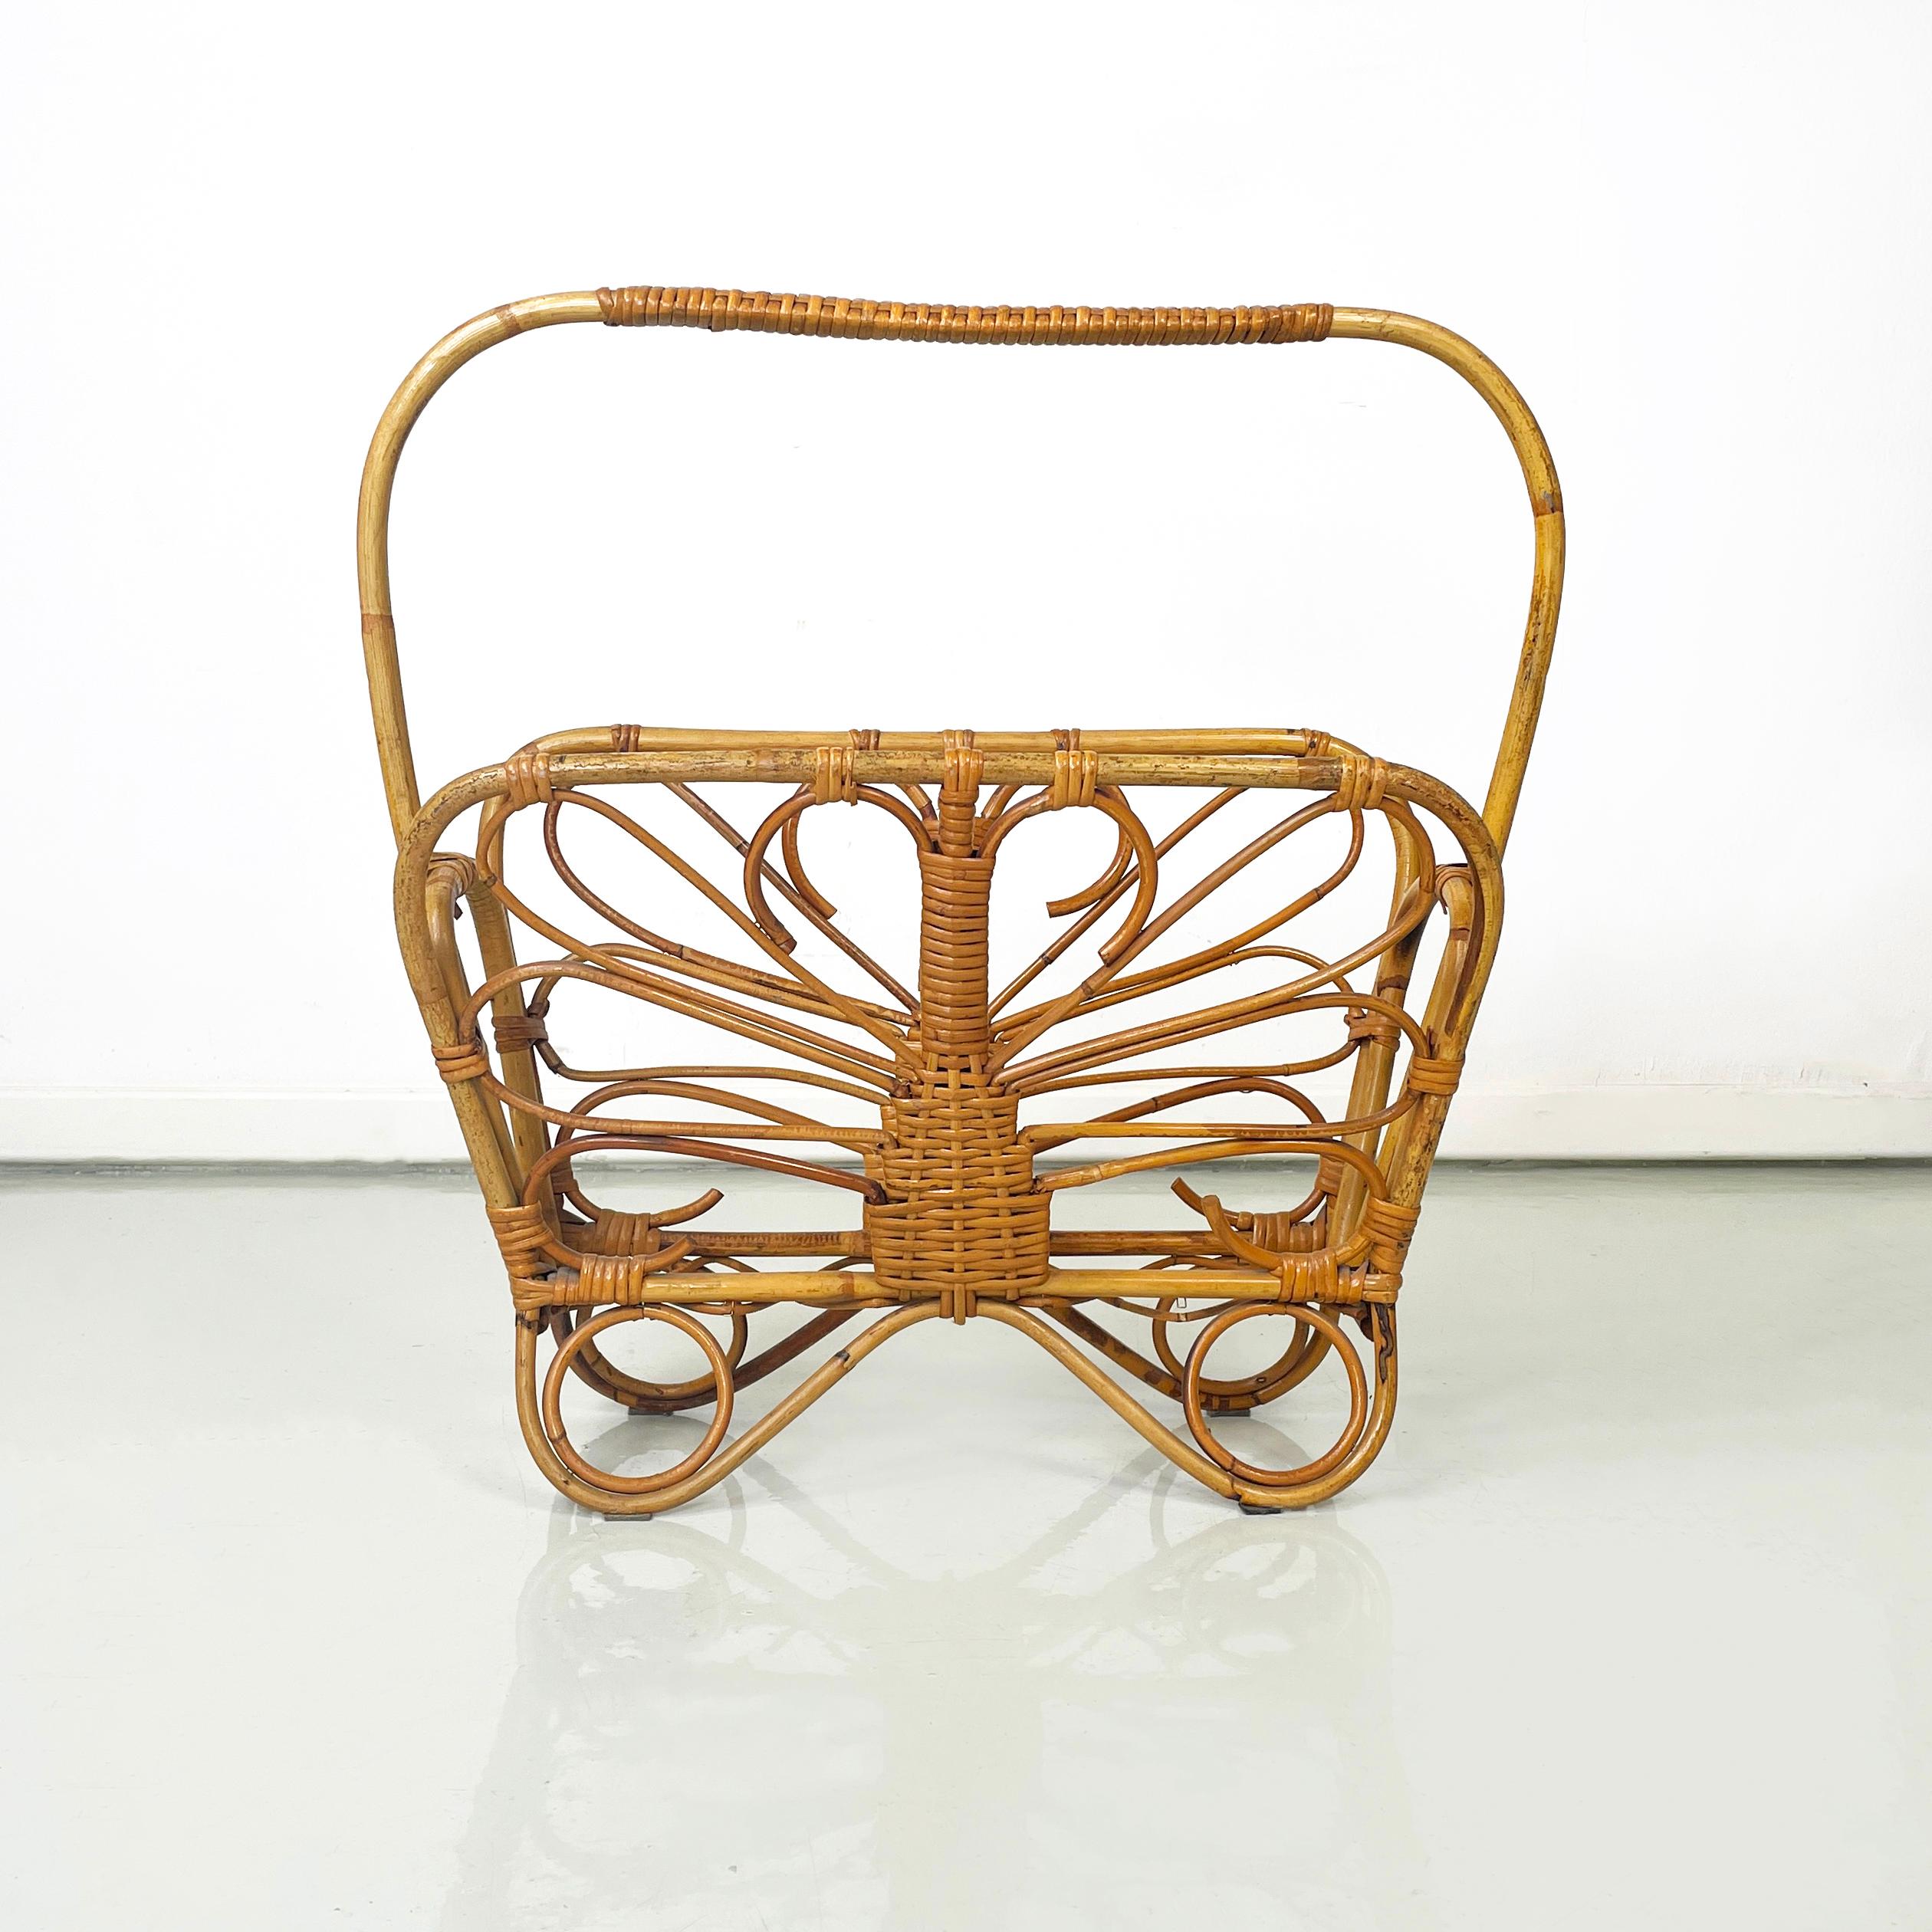 Italian mid-century modern Magazine rack in finely woven rattan with handle, 1960s
Magazine rack entirely structured in curved and finely woven rattan. The magazine section is V-shaped and has a rounded design on both sides. There is a handle at the